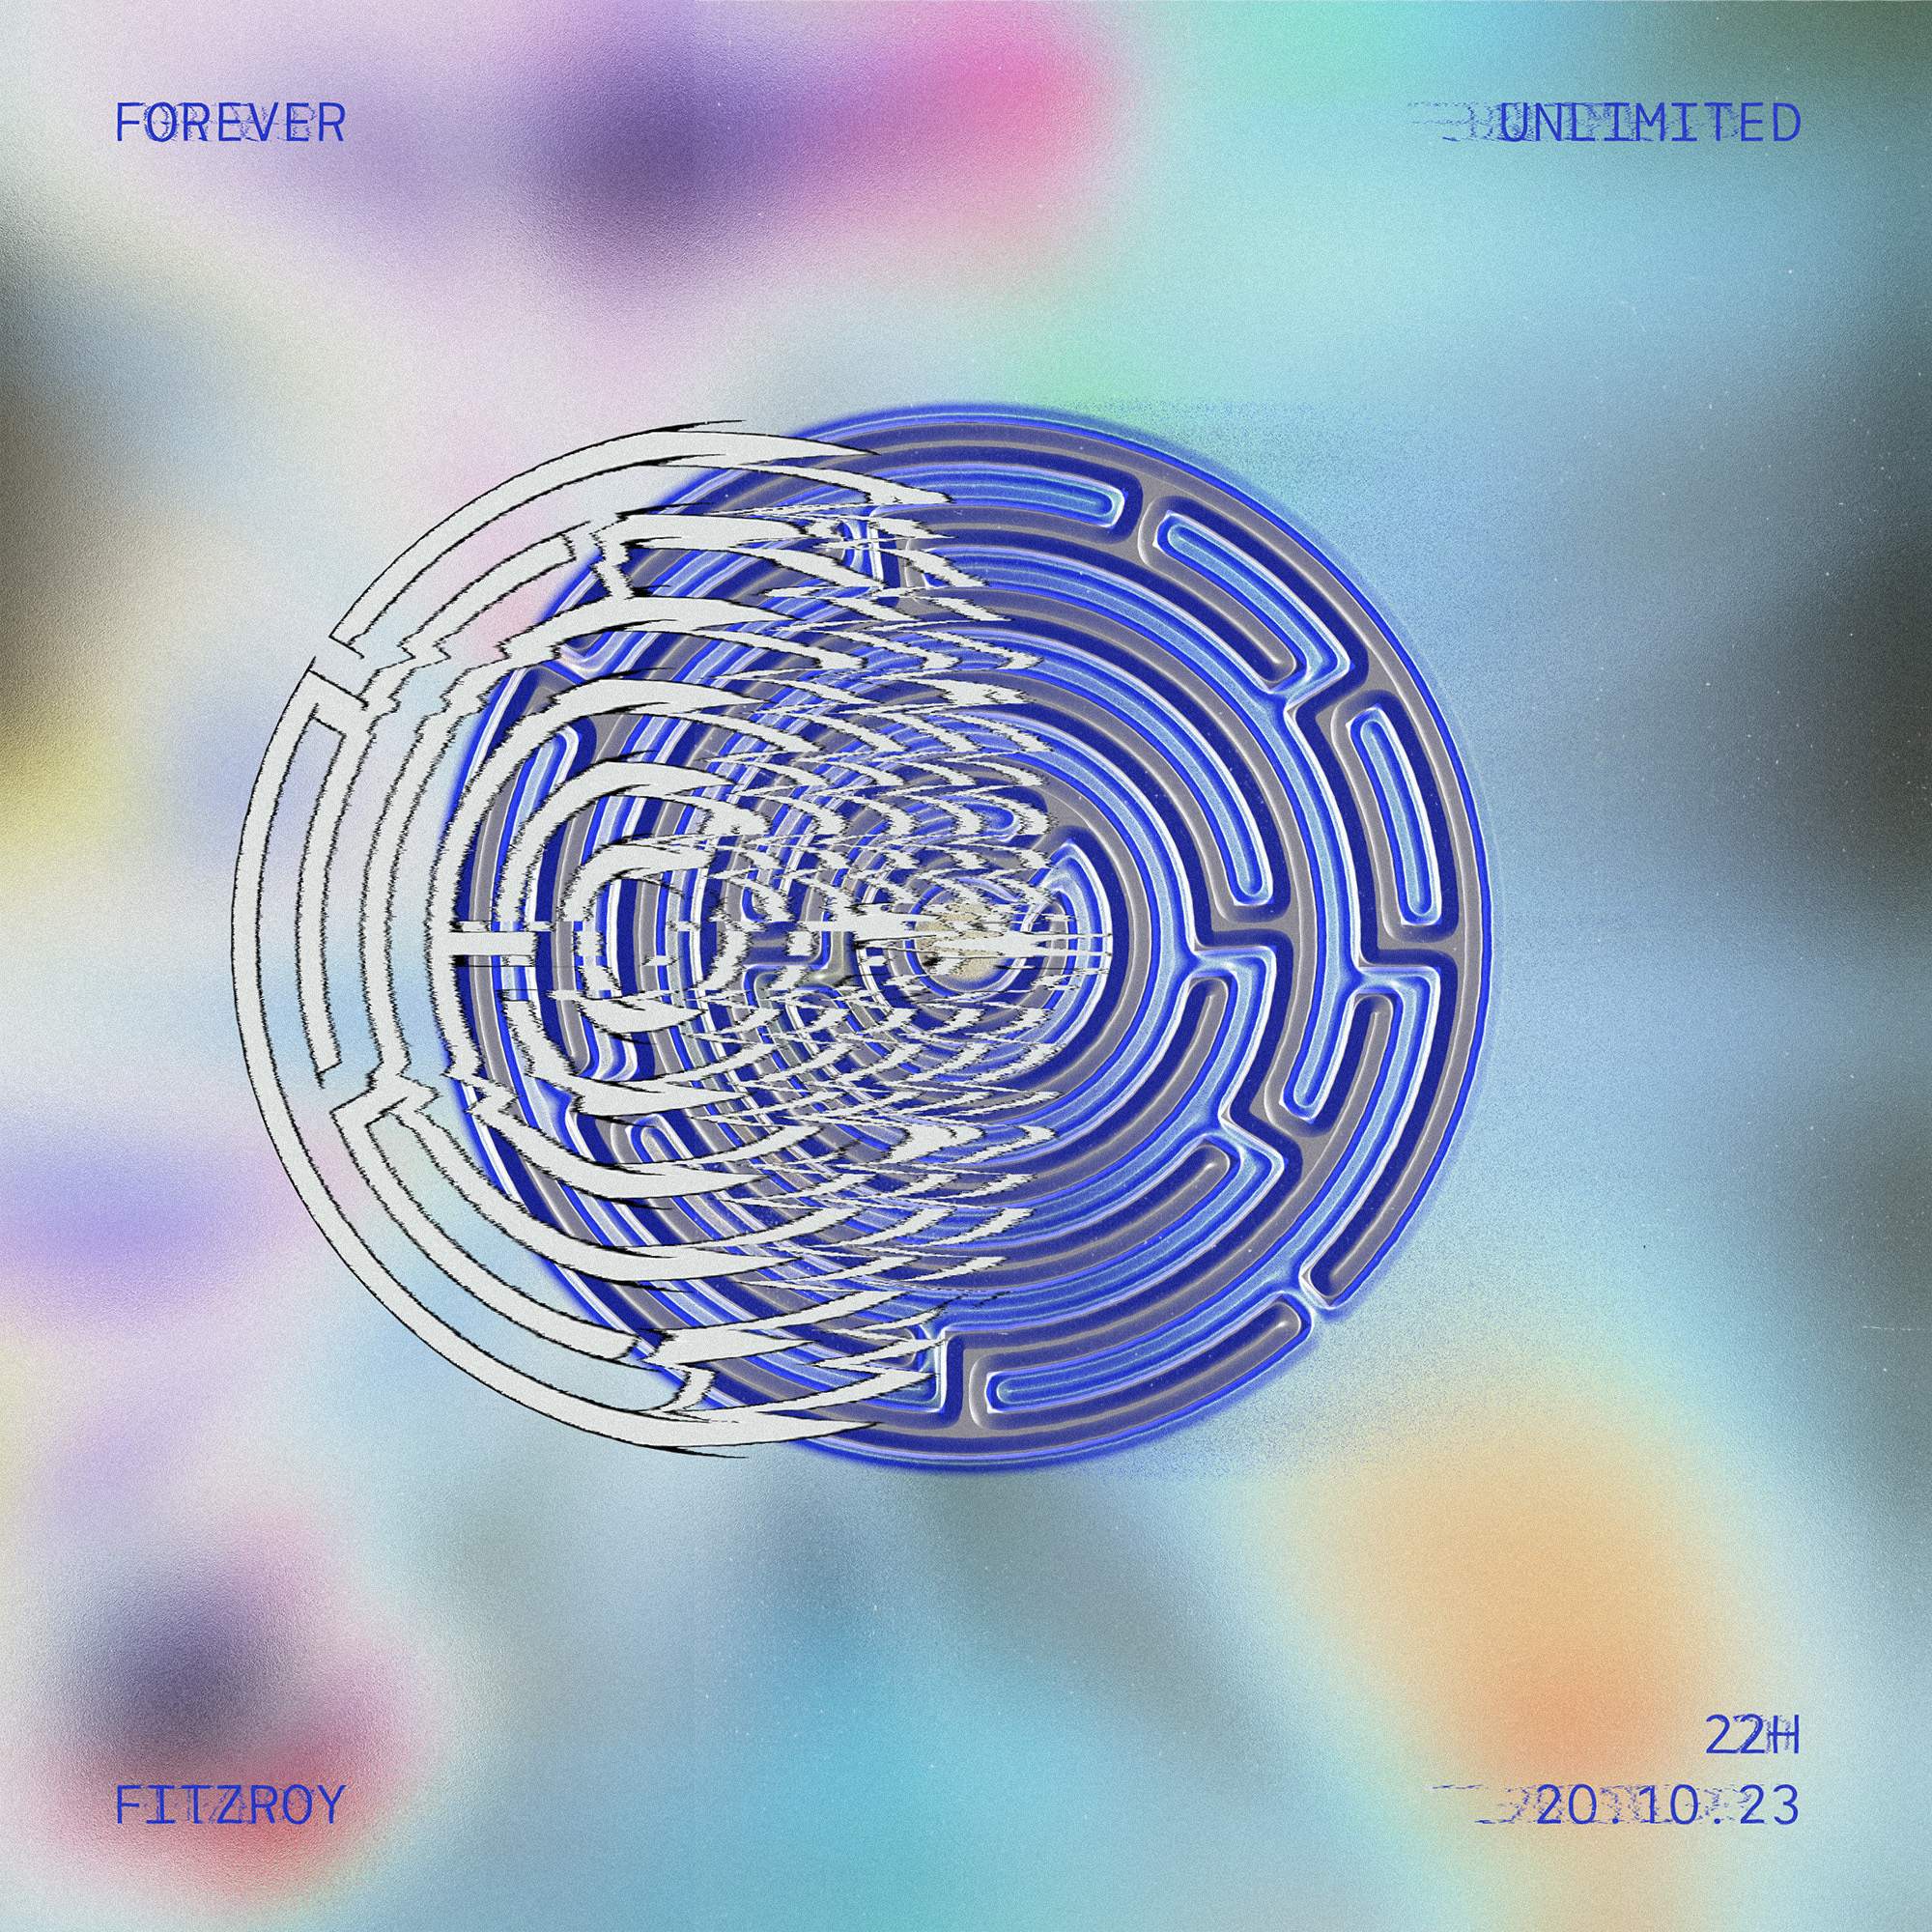 forever unlimited - フライヤー表